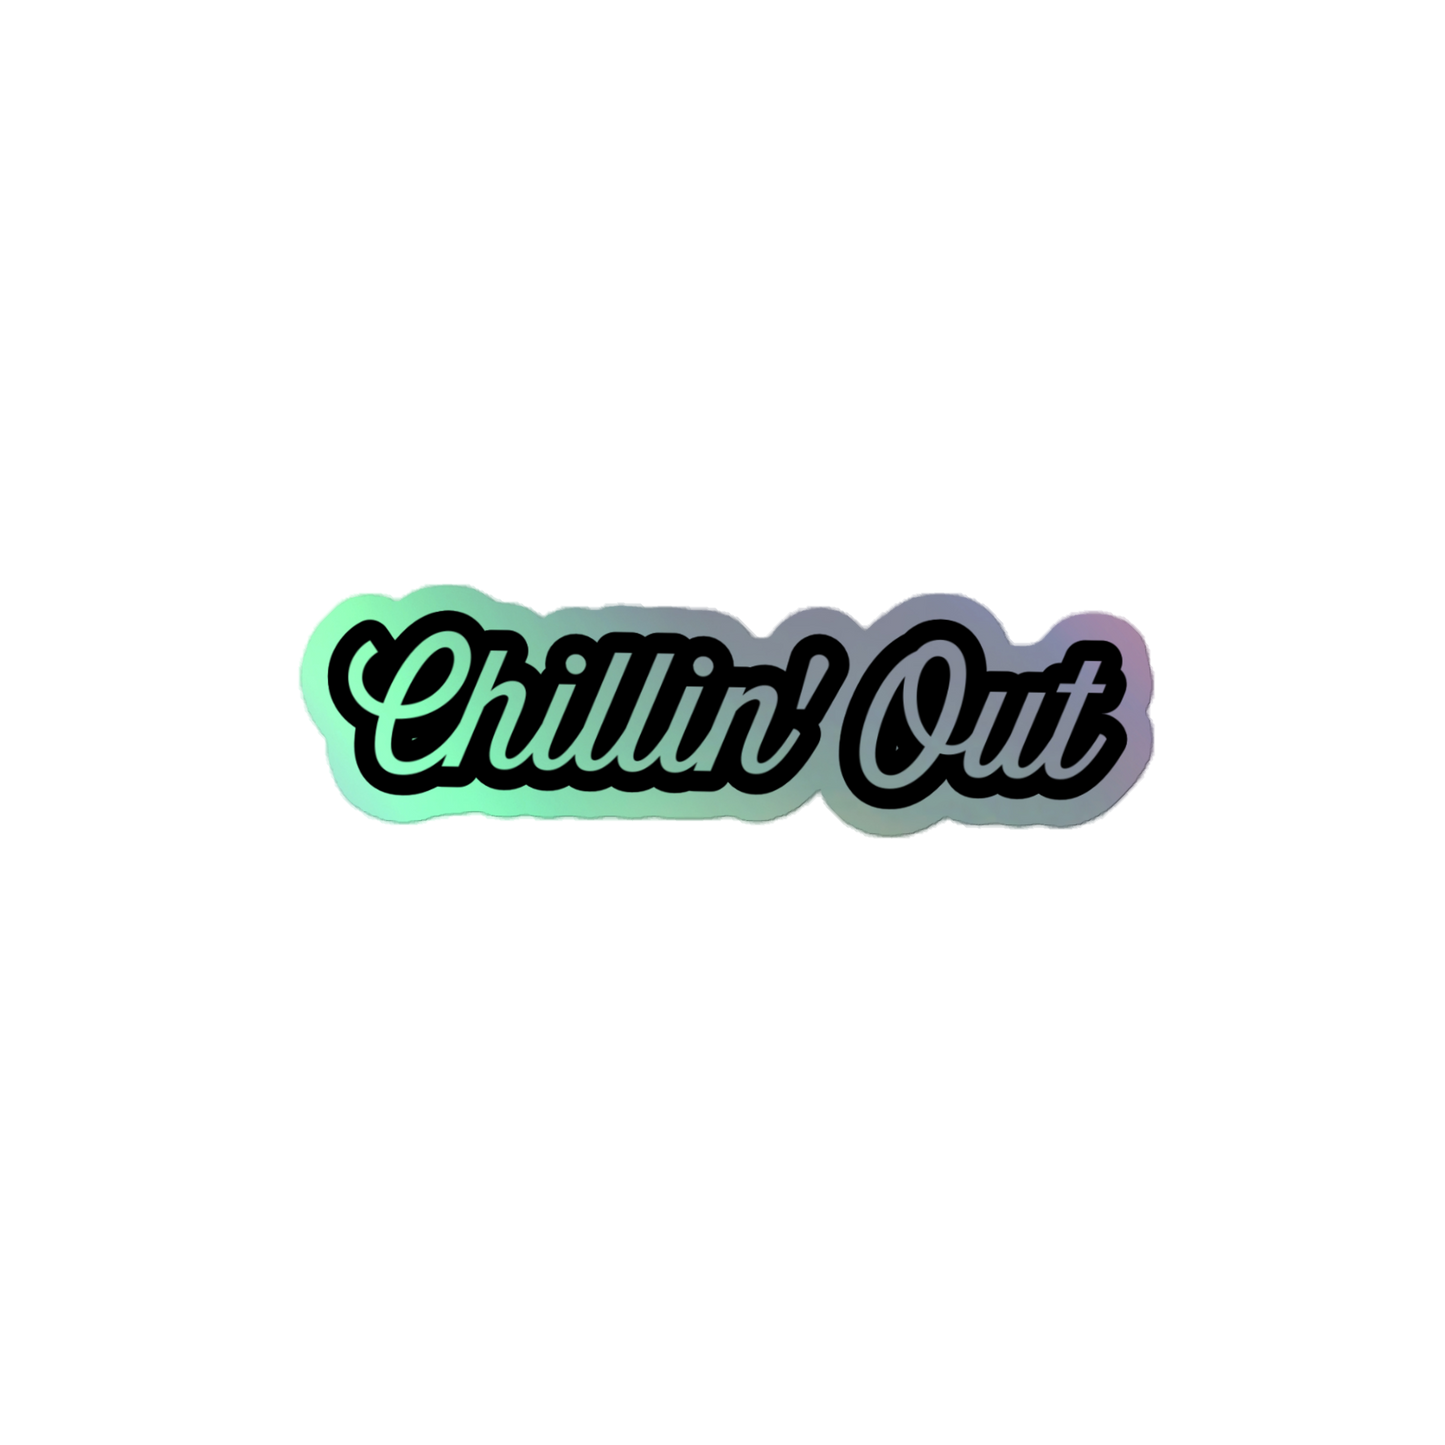 Chillin' Out - Holographic stickers